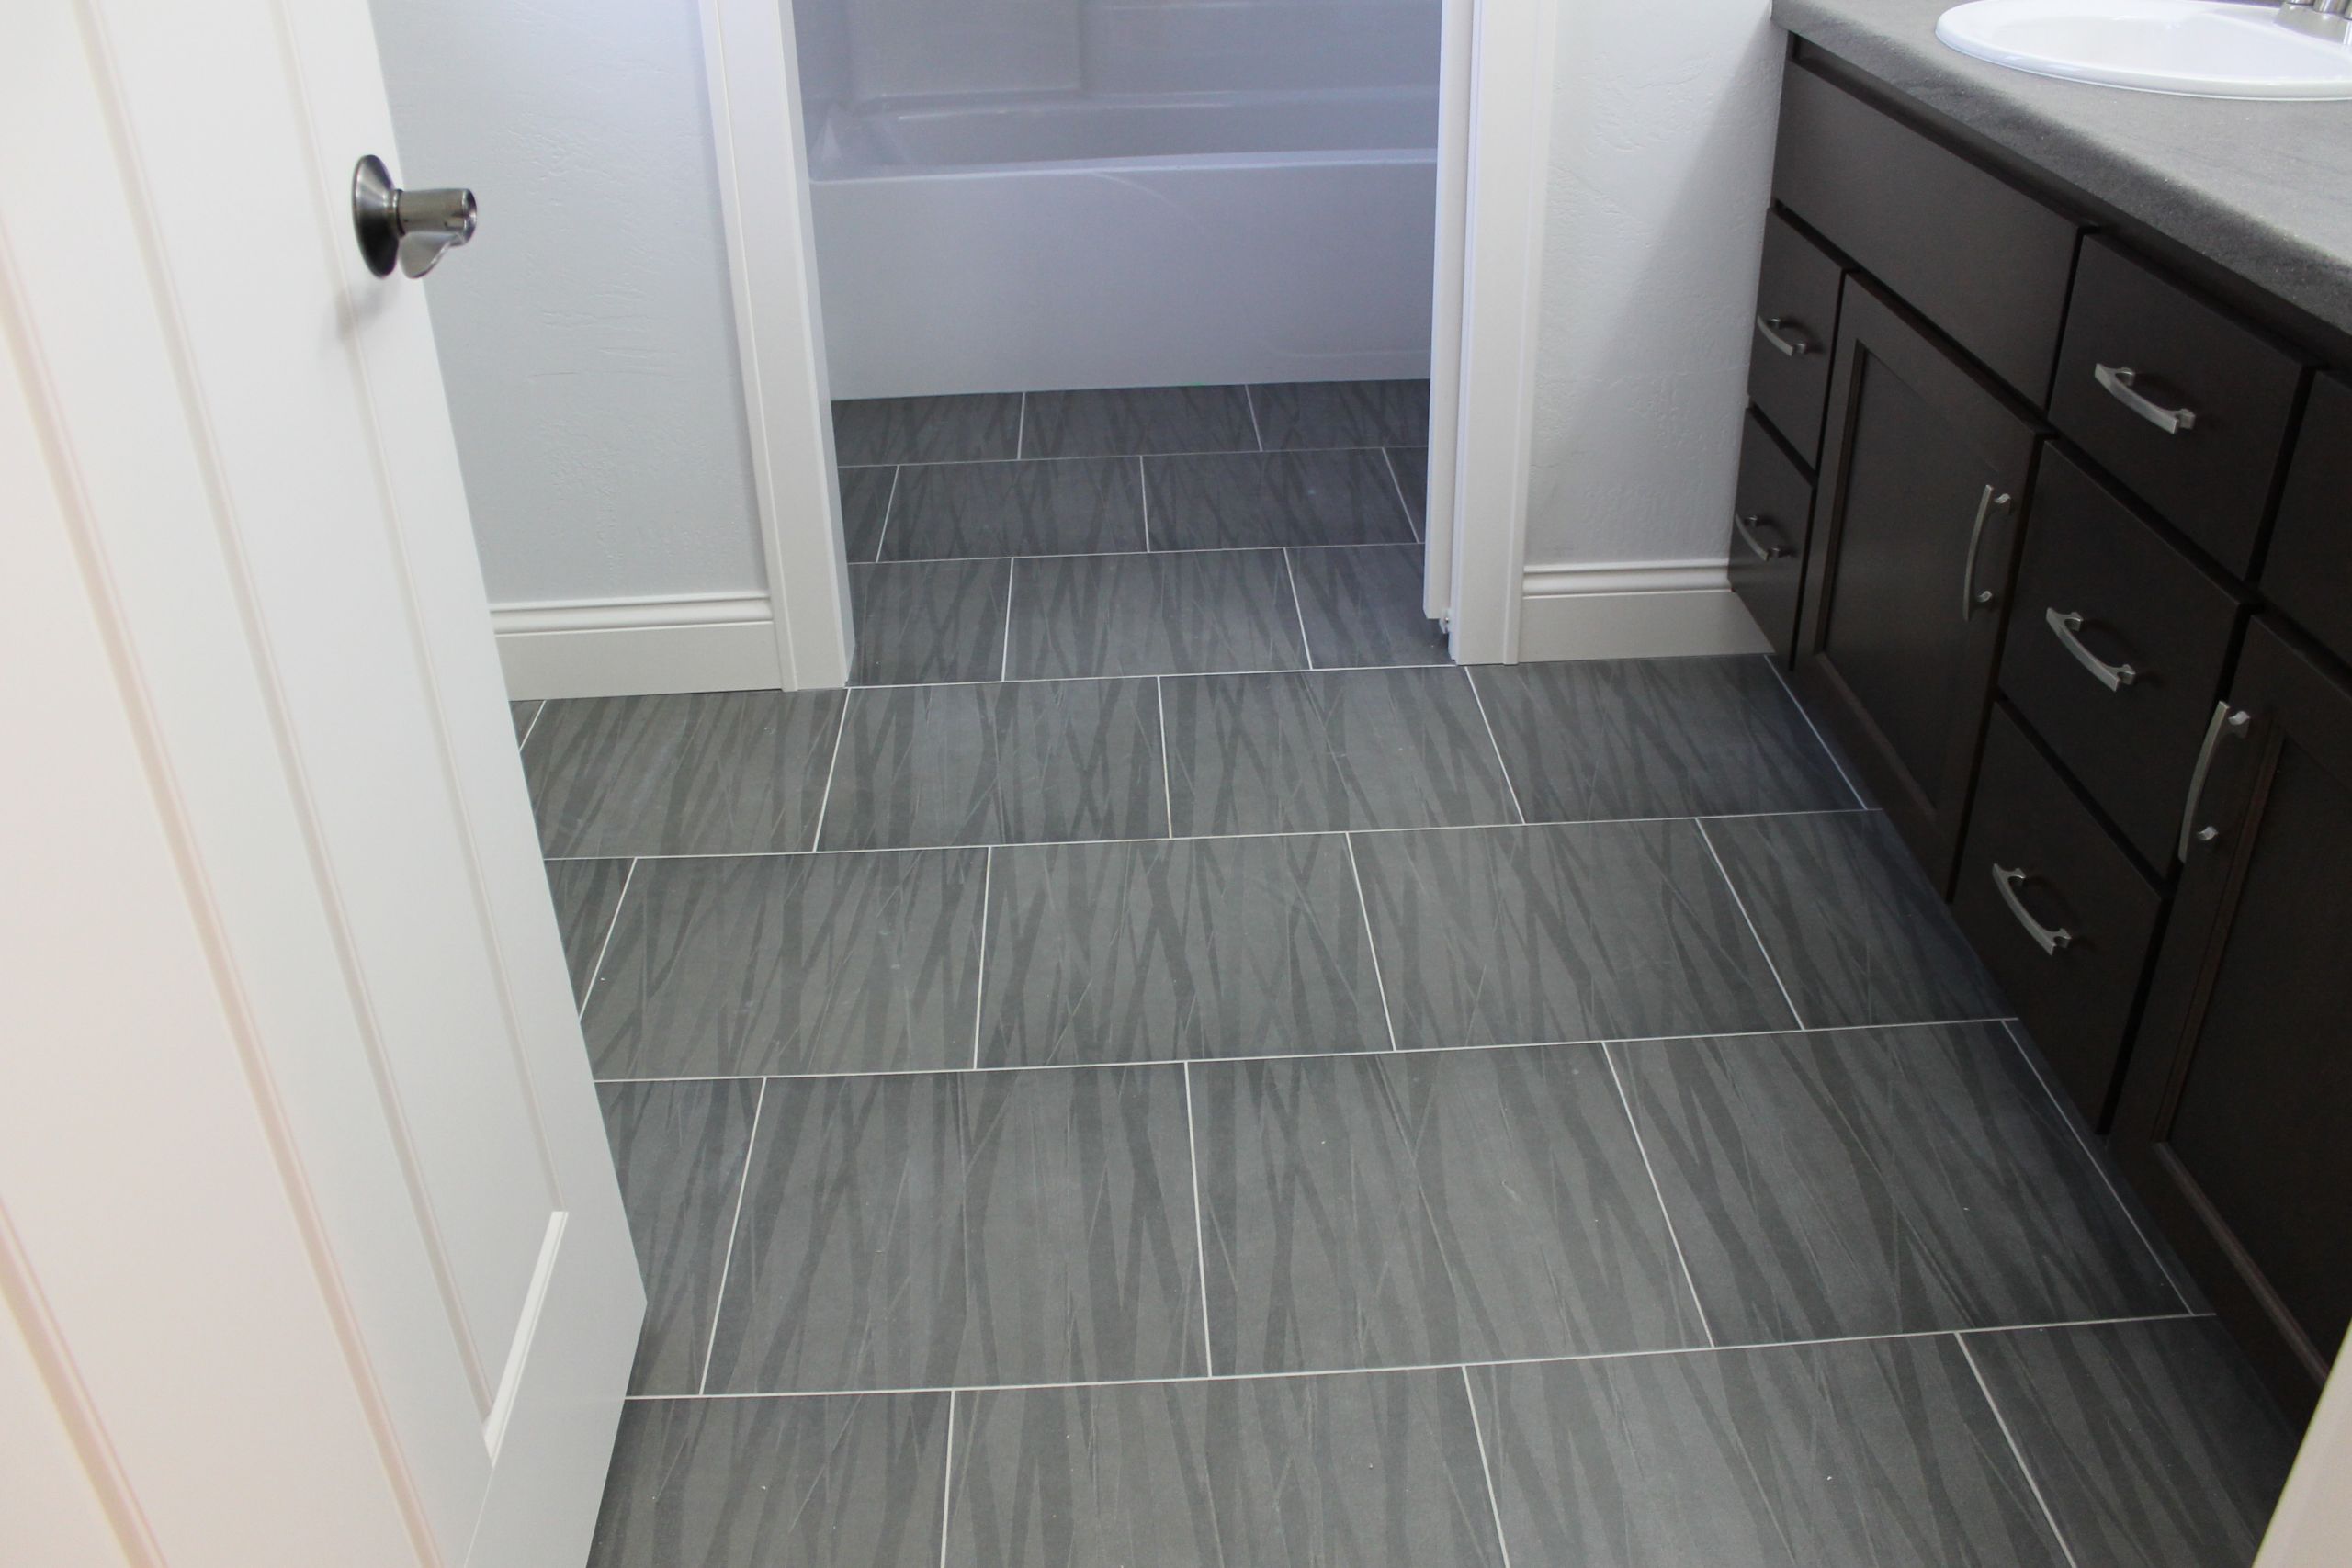 Grey Bathroom Floor Tiles
 What’s Hot in Tile Showers right now and other flooring